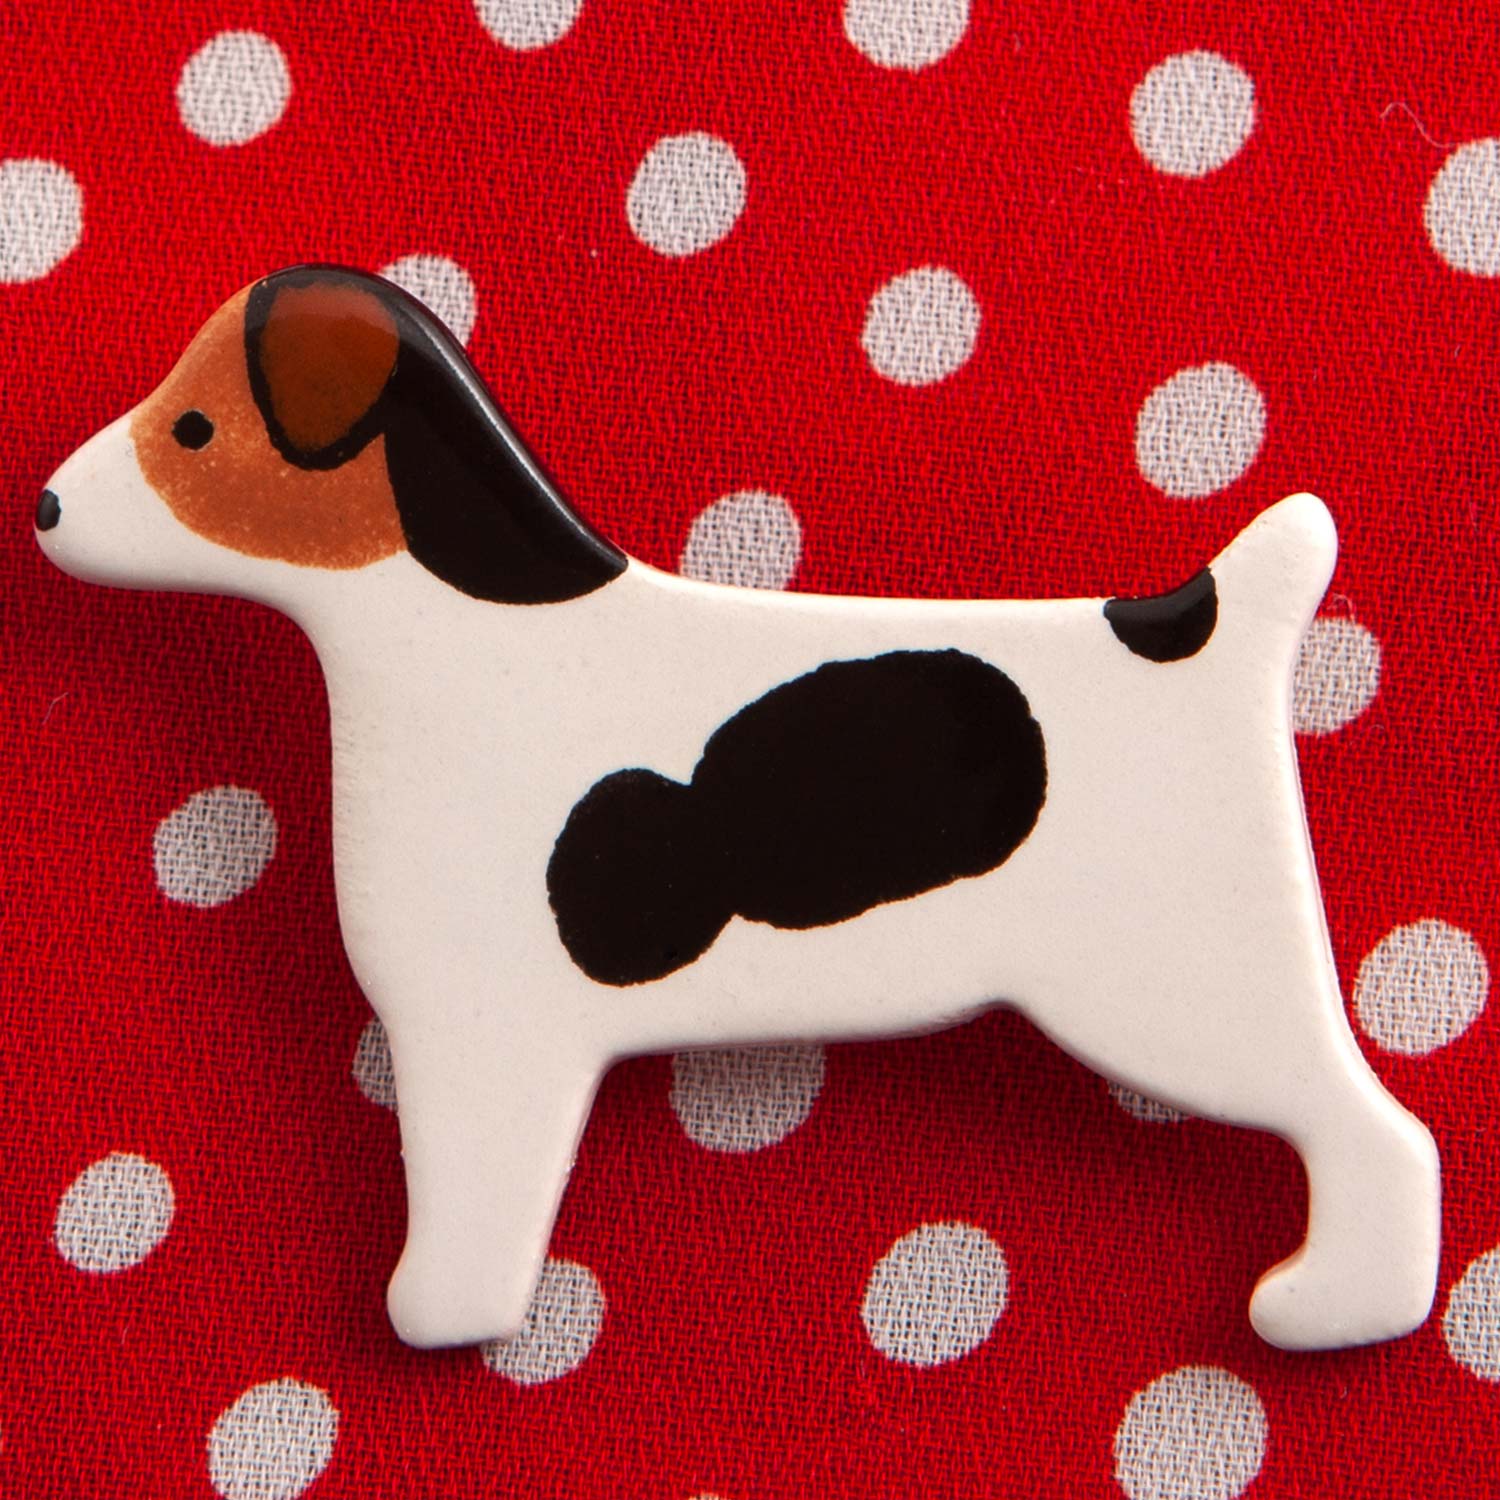 Dog Lover Gifts available at Dog Krazy Gifts – Ceramic Chocolate Labrador Brooch by Mary Goldberg of Stockwell Ceramics, Just Part Of Our Collection Of Jack Russell Themed Gifts, Available At www.dogkrazygifts.co.uk